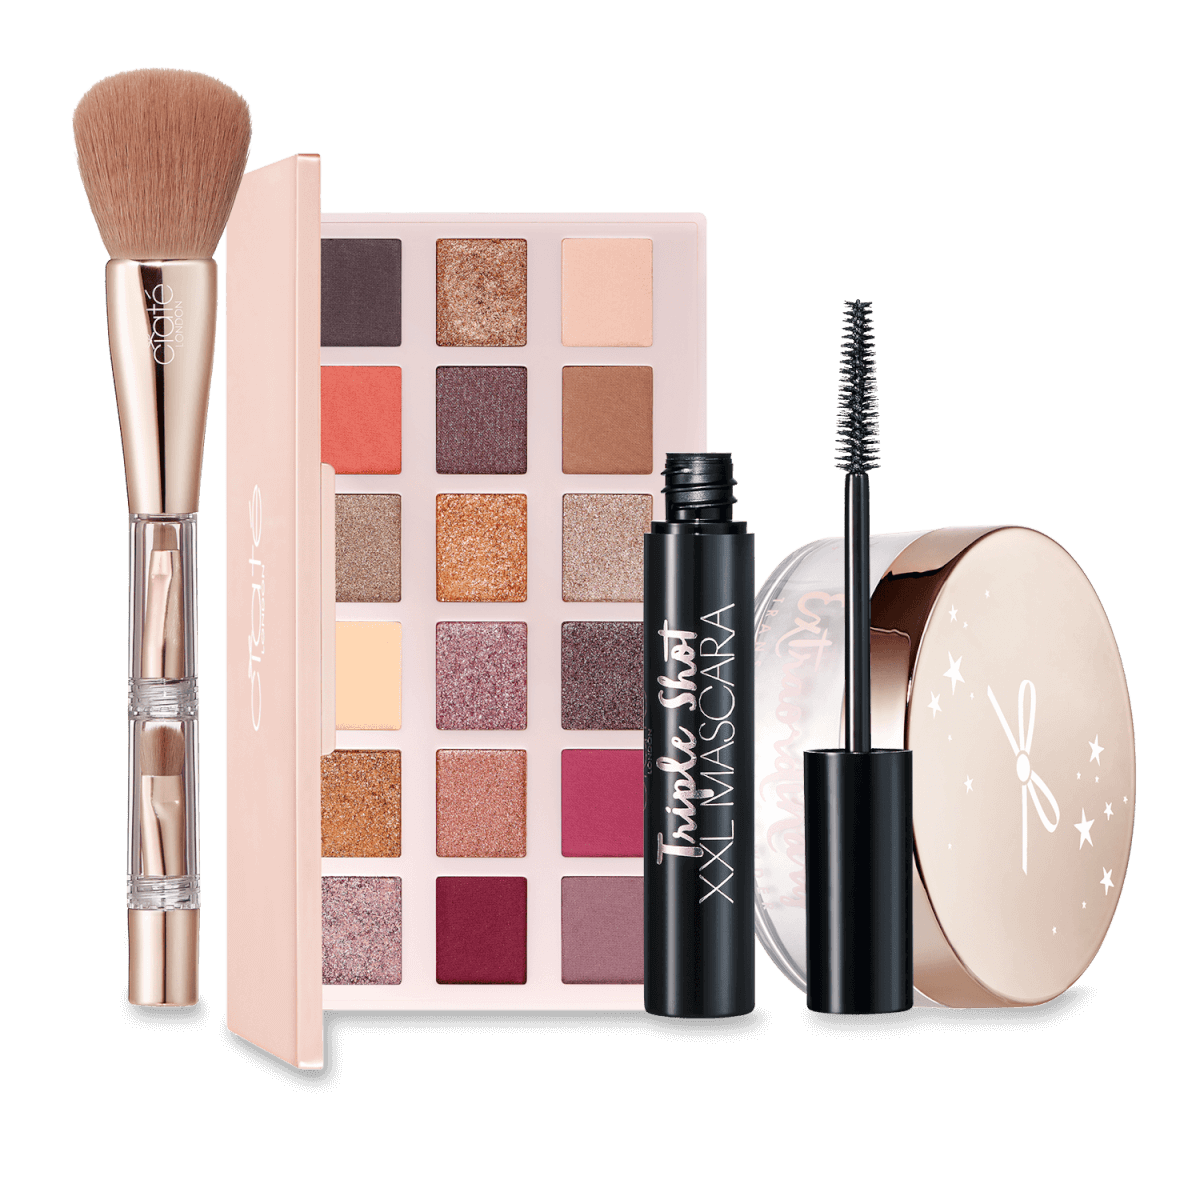 Ciate London - The Eye Haul Only £29 (Worth £88.50)